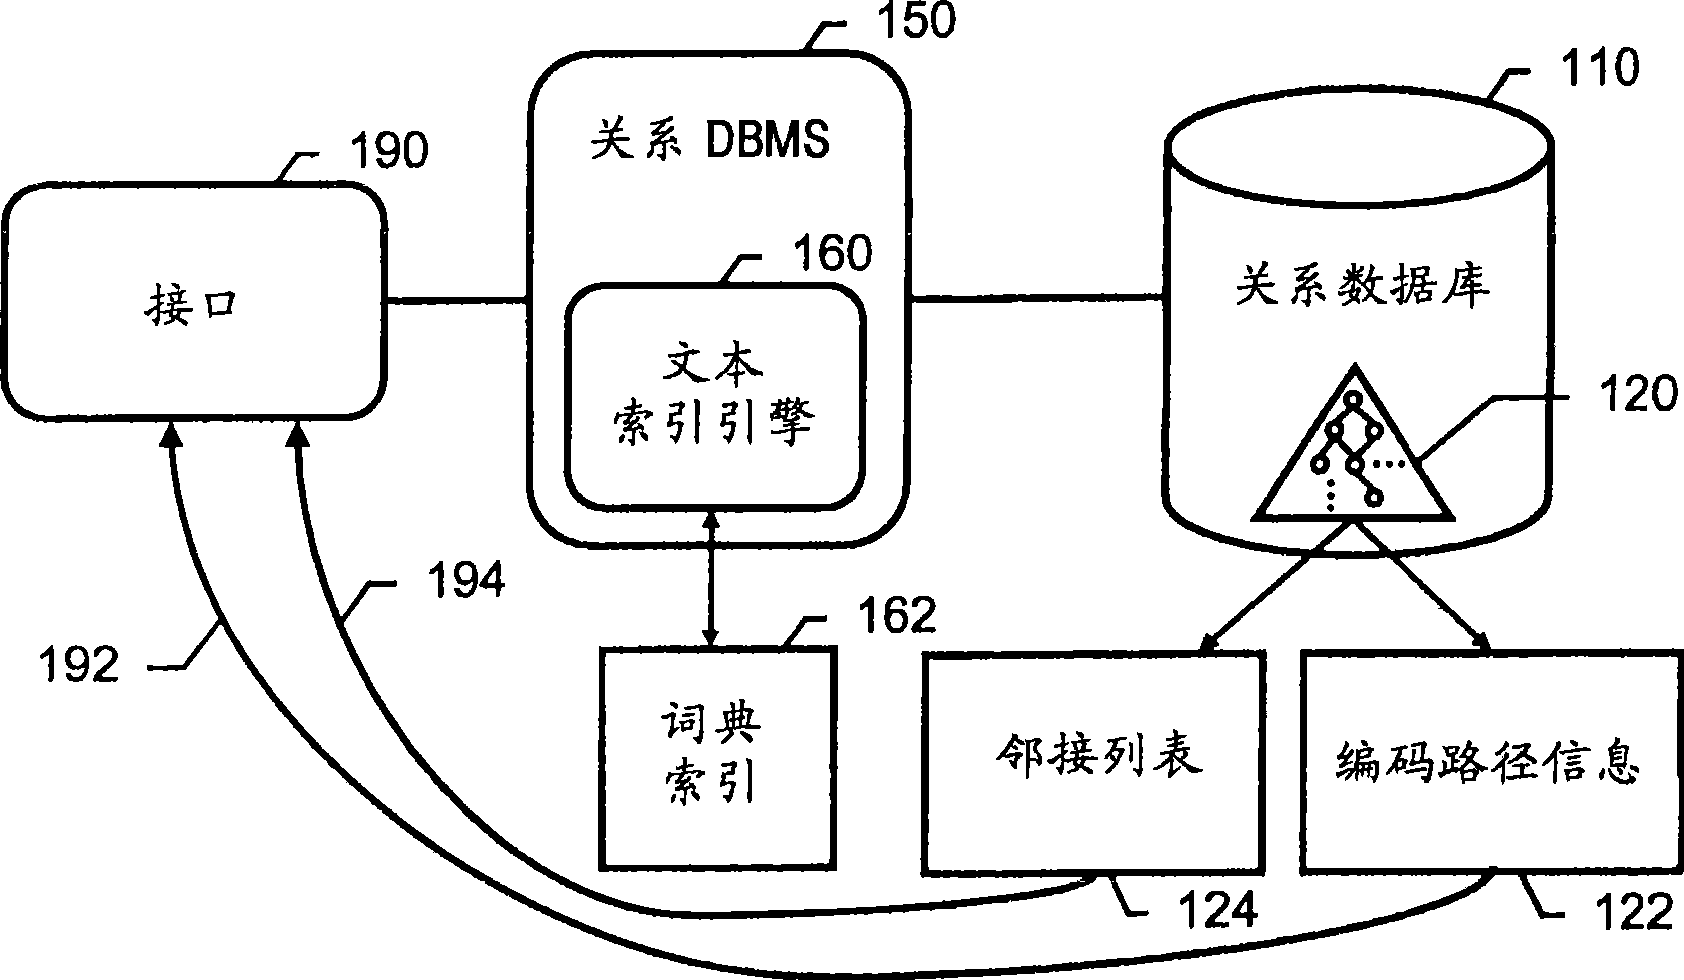 System and method of efficiently representing and searching directed acyclic graph structures in databases